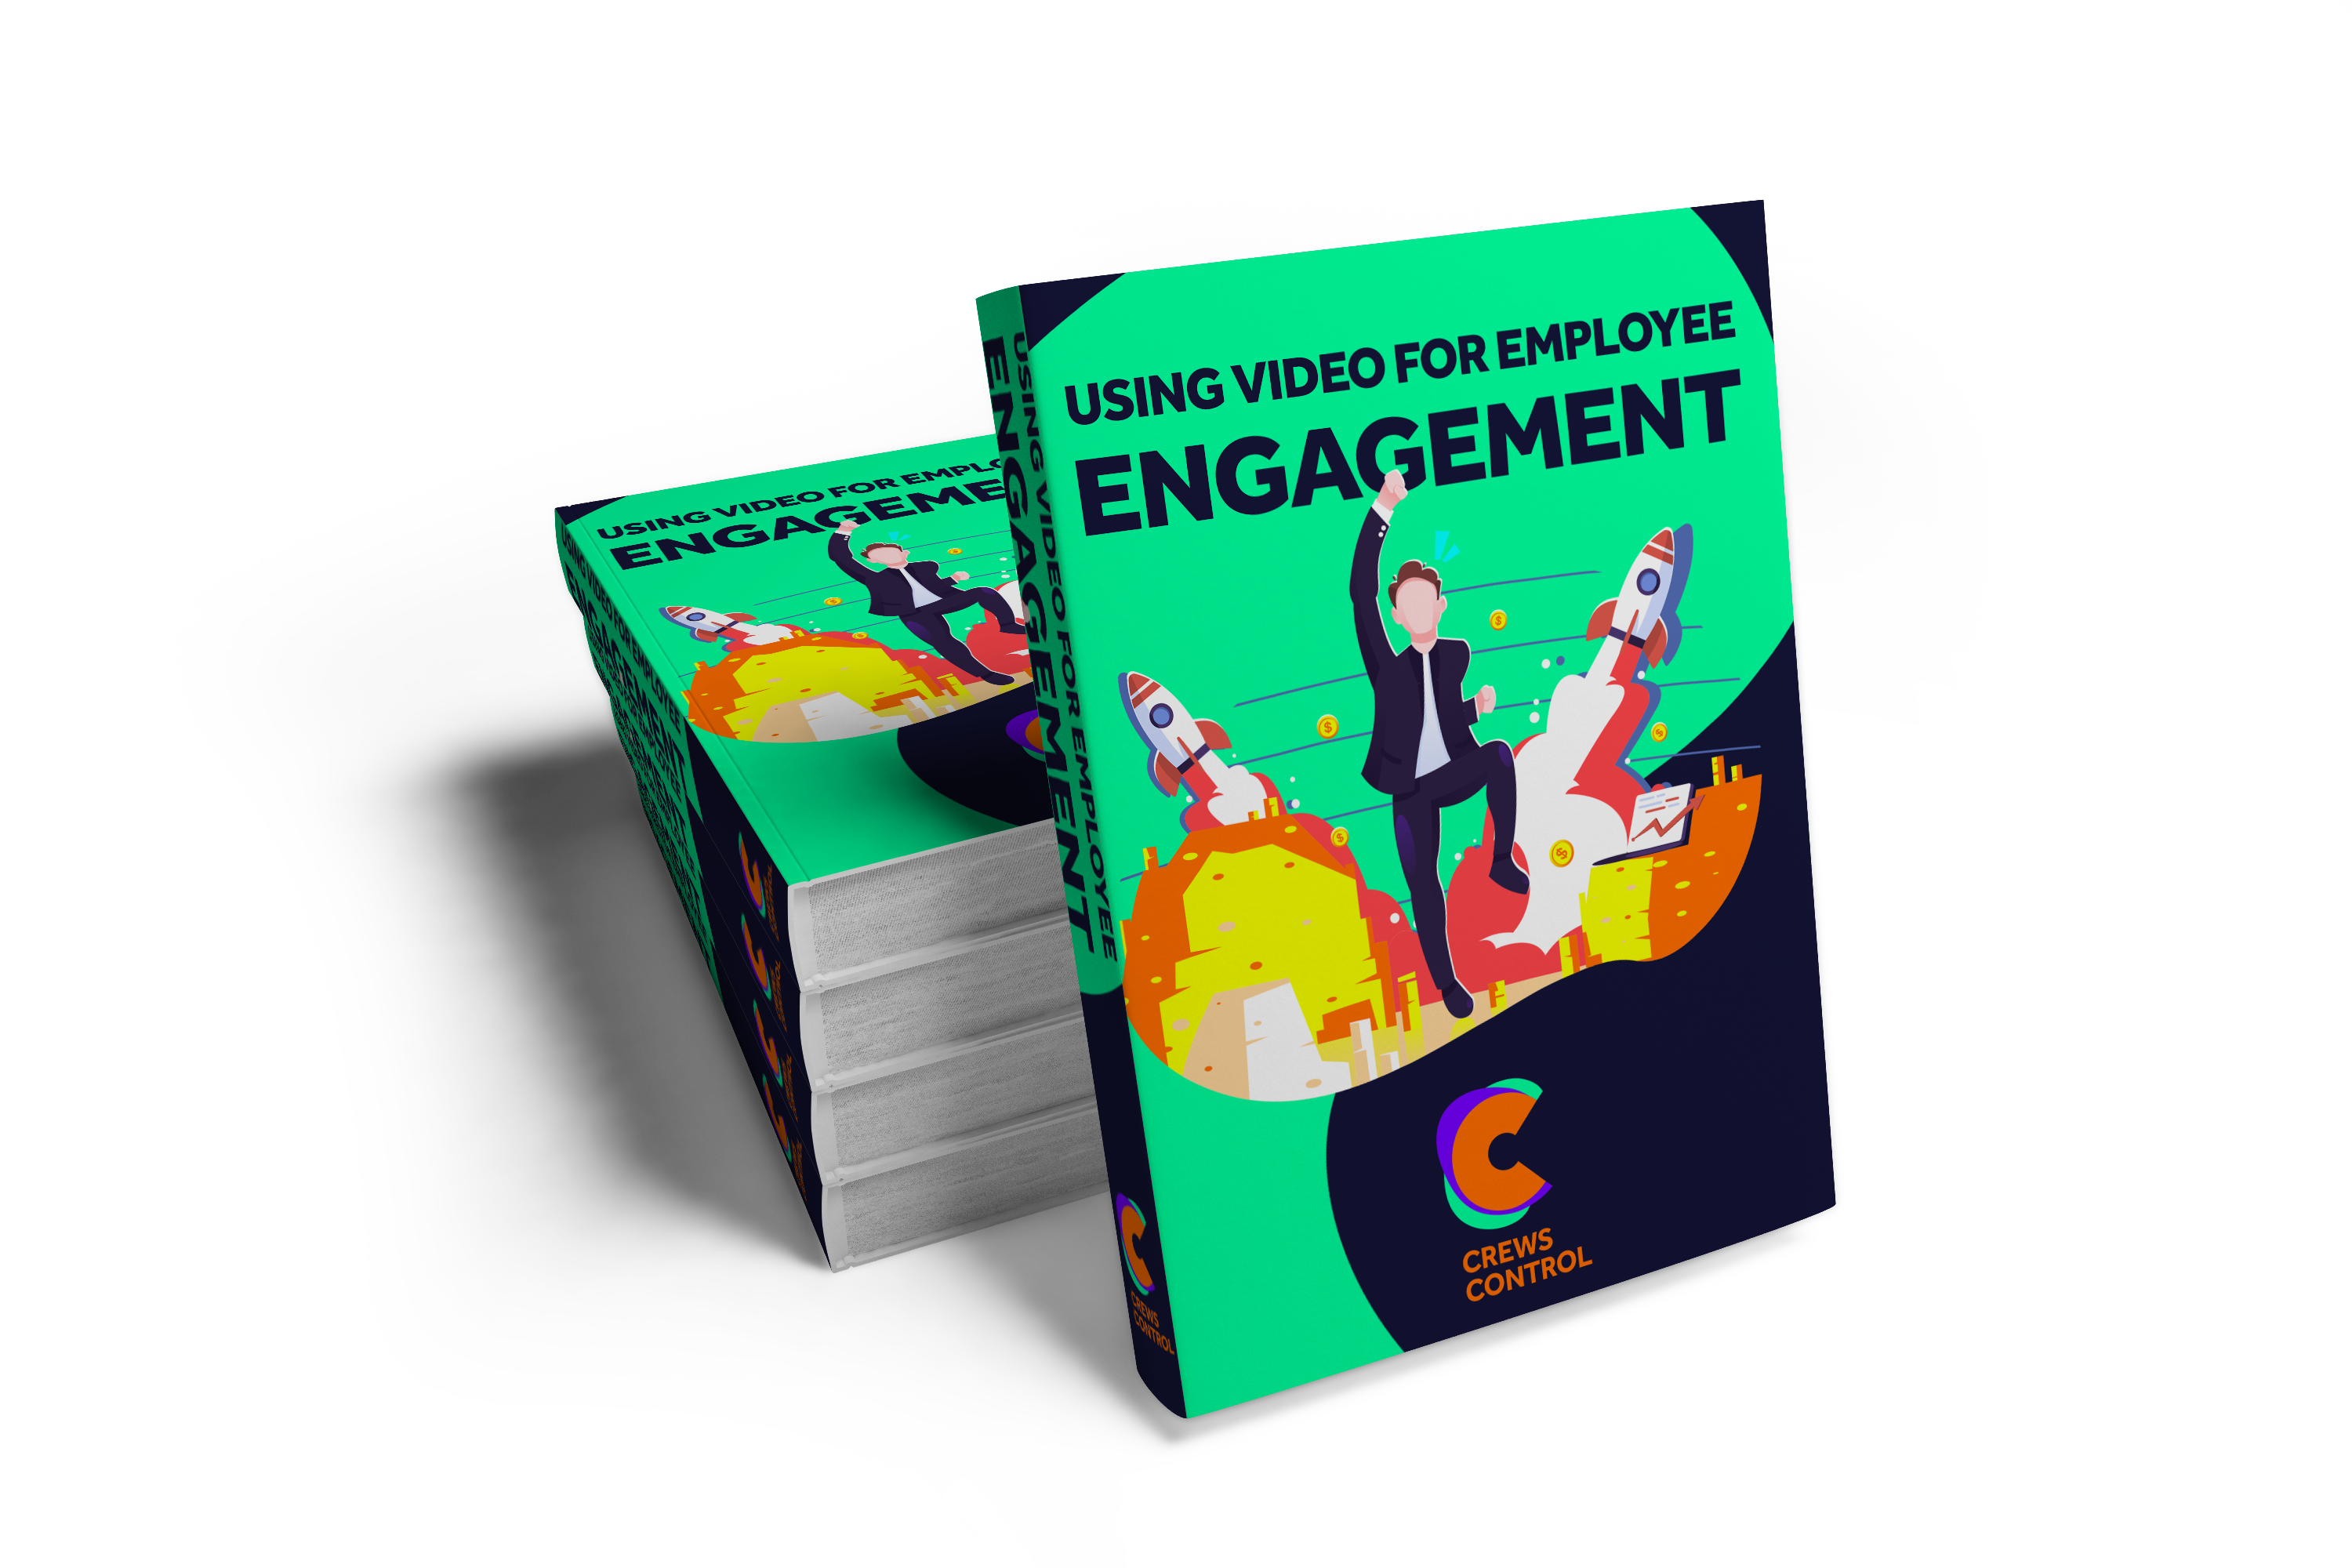 sing video for employee engagement free eBook!